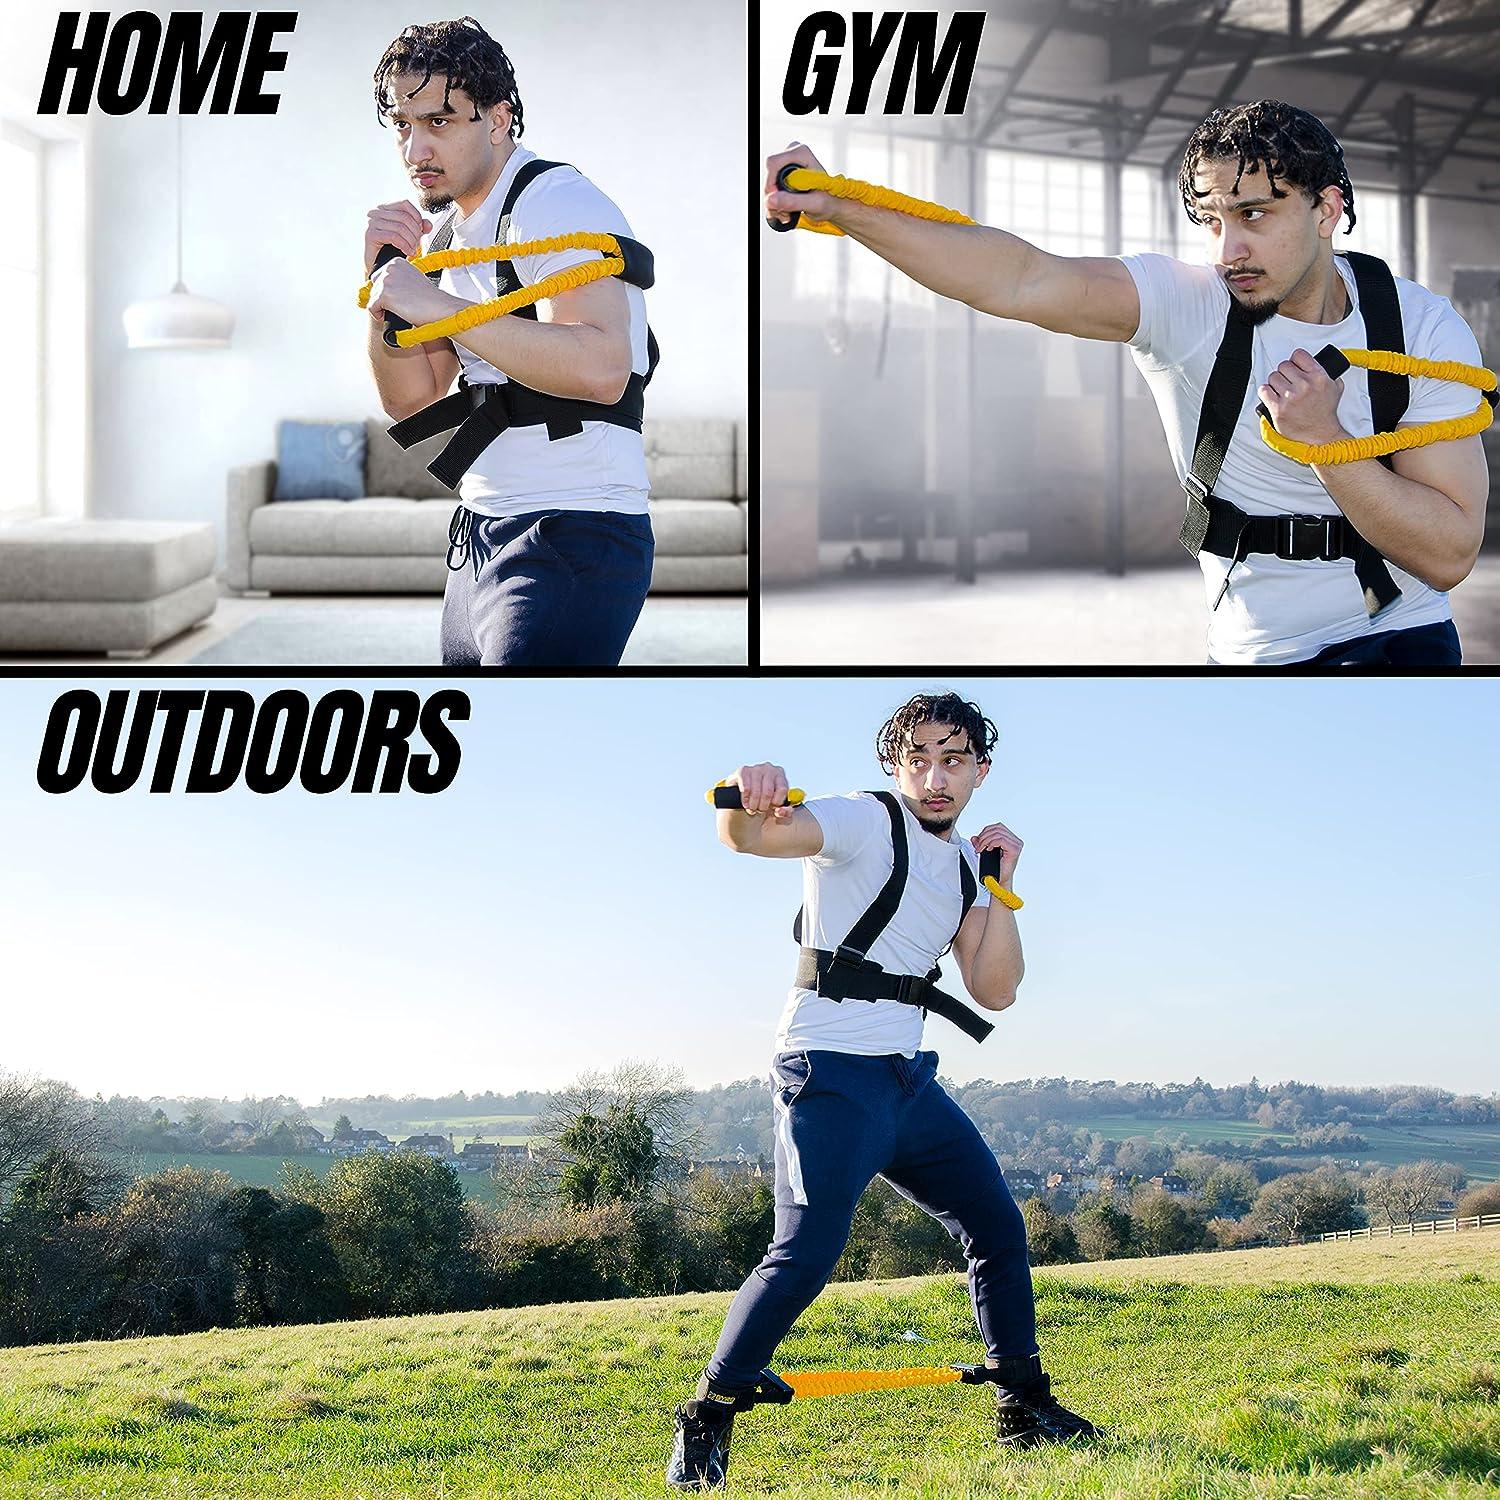  GYRO FITNESS, Shadow Boxer Pro, Boxing Resistance Bands Set  for Shadow Boxing, Comes with Ankle Cuffs